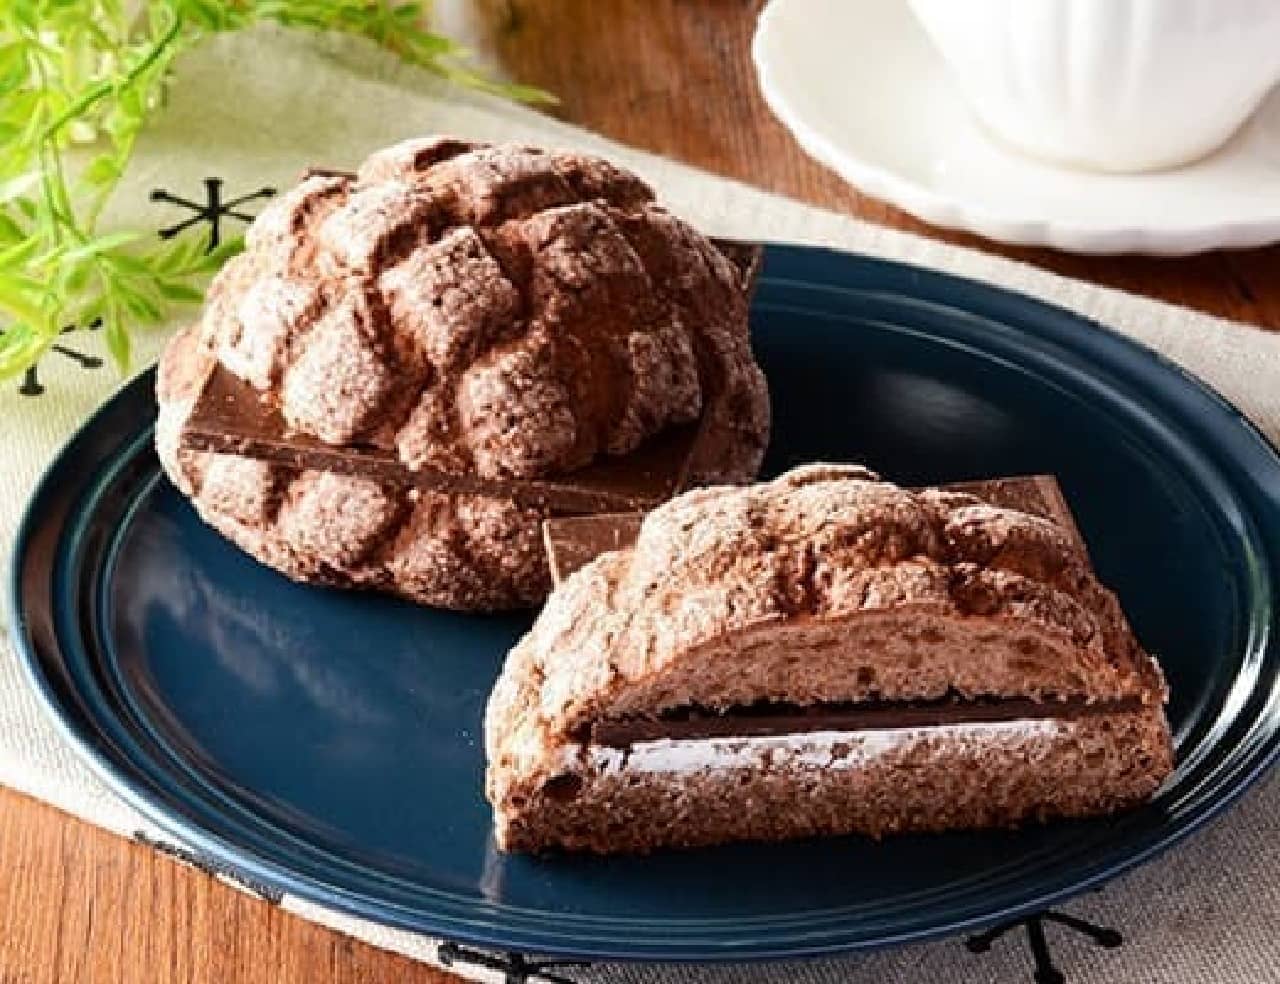 Lawson "Chocolate melon bread that sticks out"